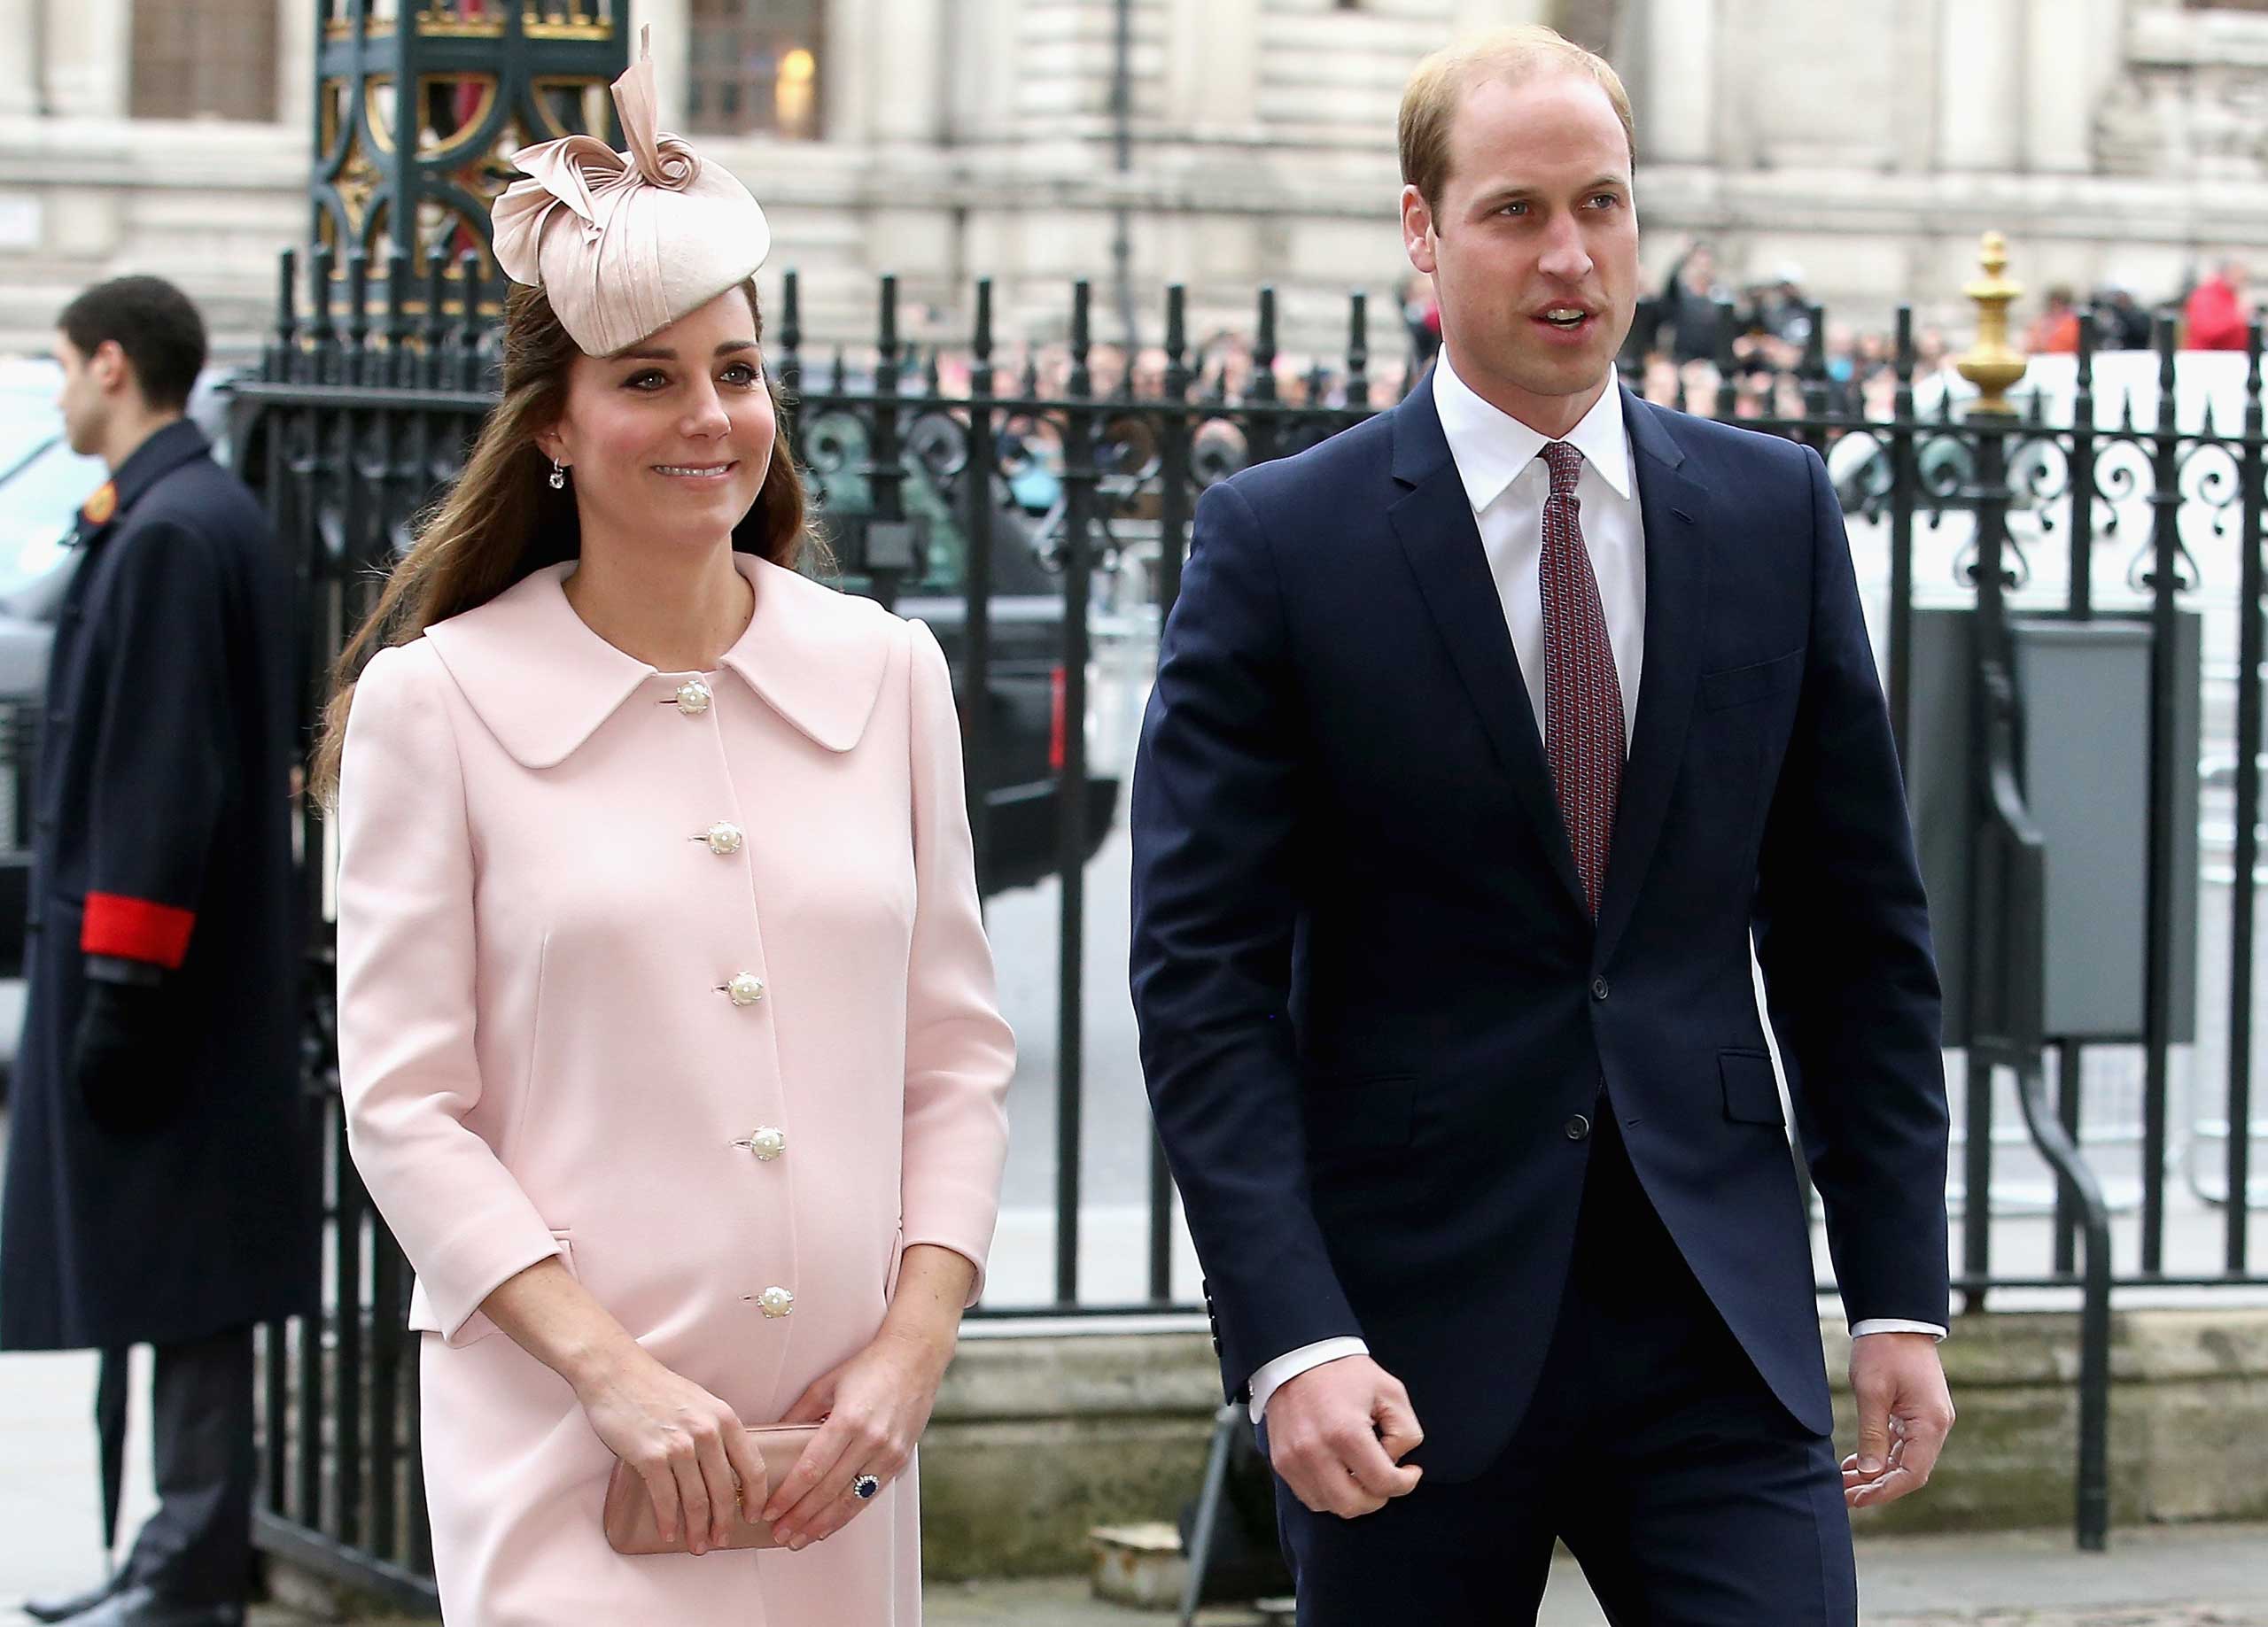 Catherine, Duchess of Cambridge and Prince William, Duke of Cambridge attend the Observance for Commonwealth Day Service At Westminster Abbey in London on March 9, 2015. (Chris Jackson—Getty Images)